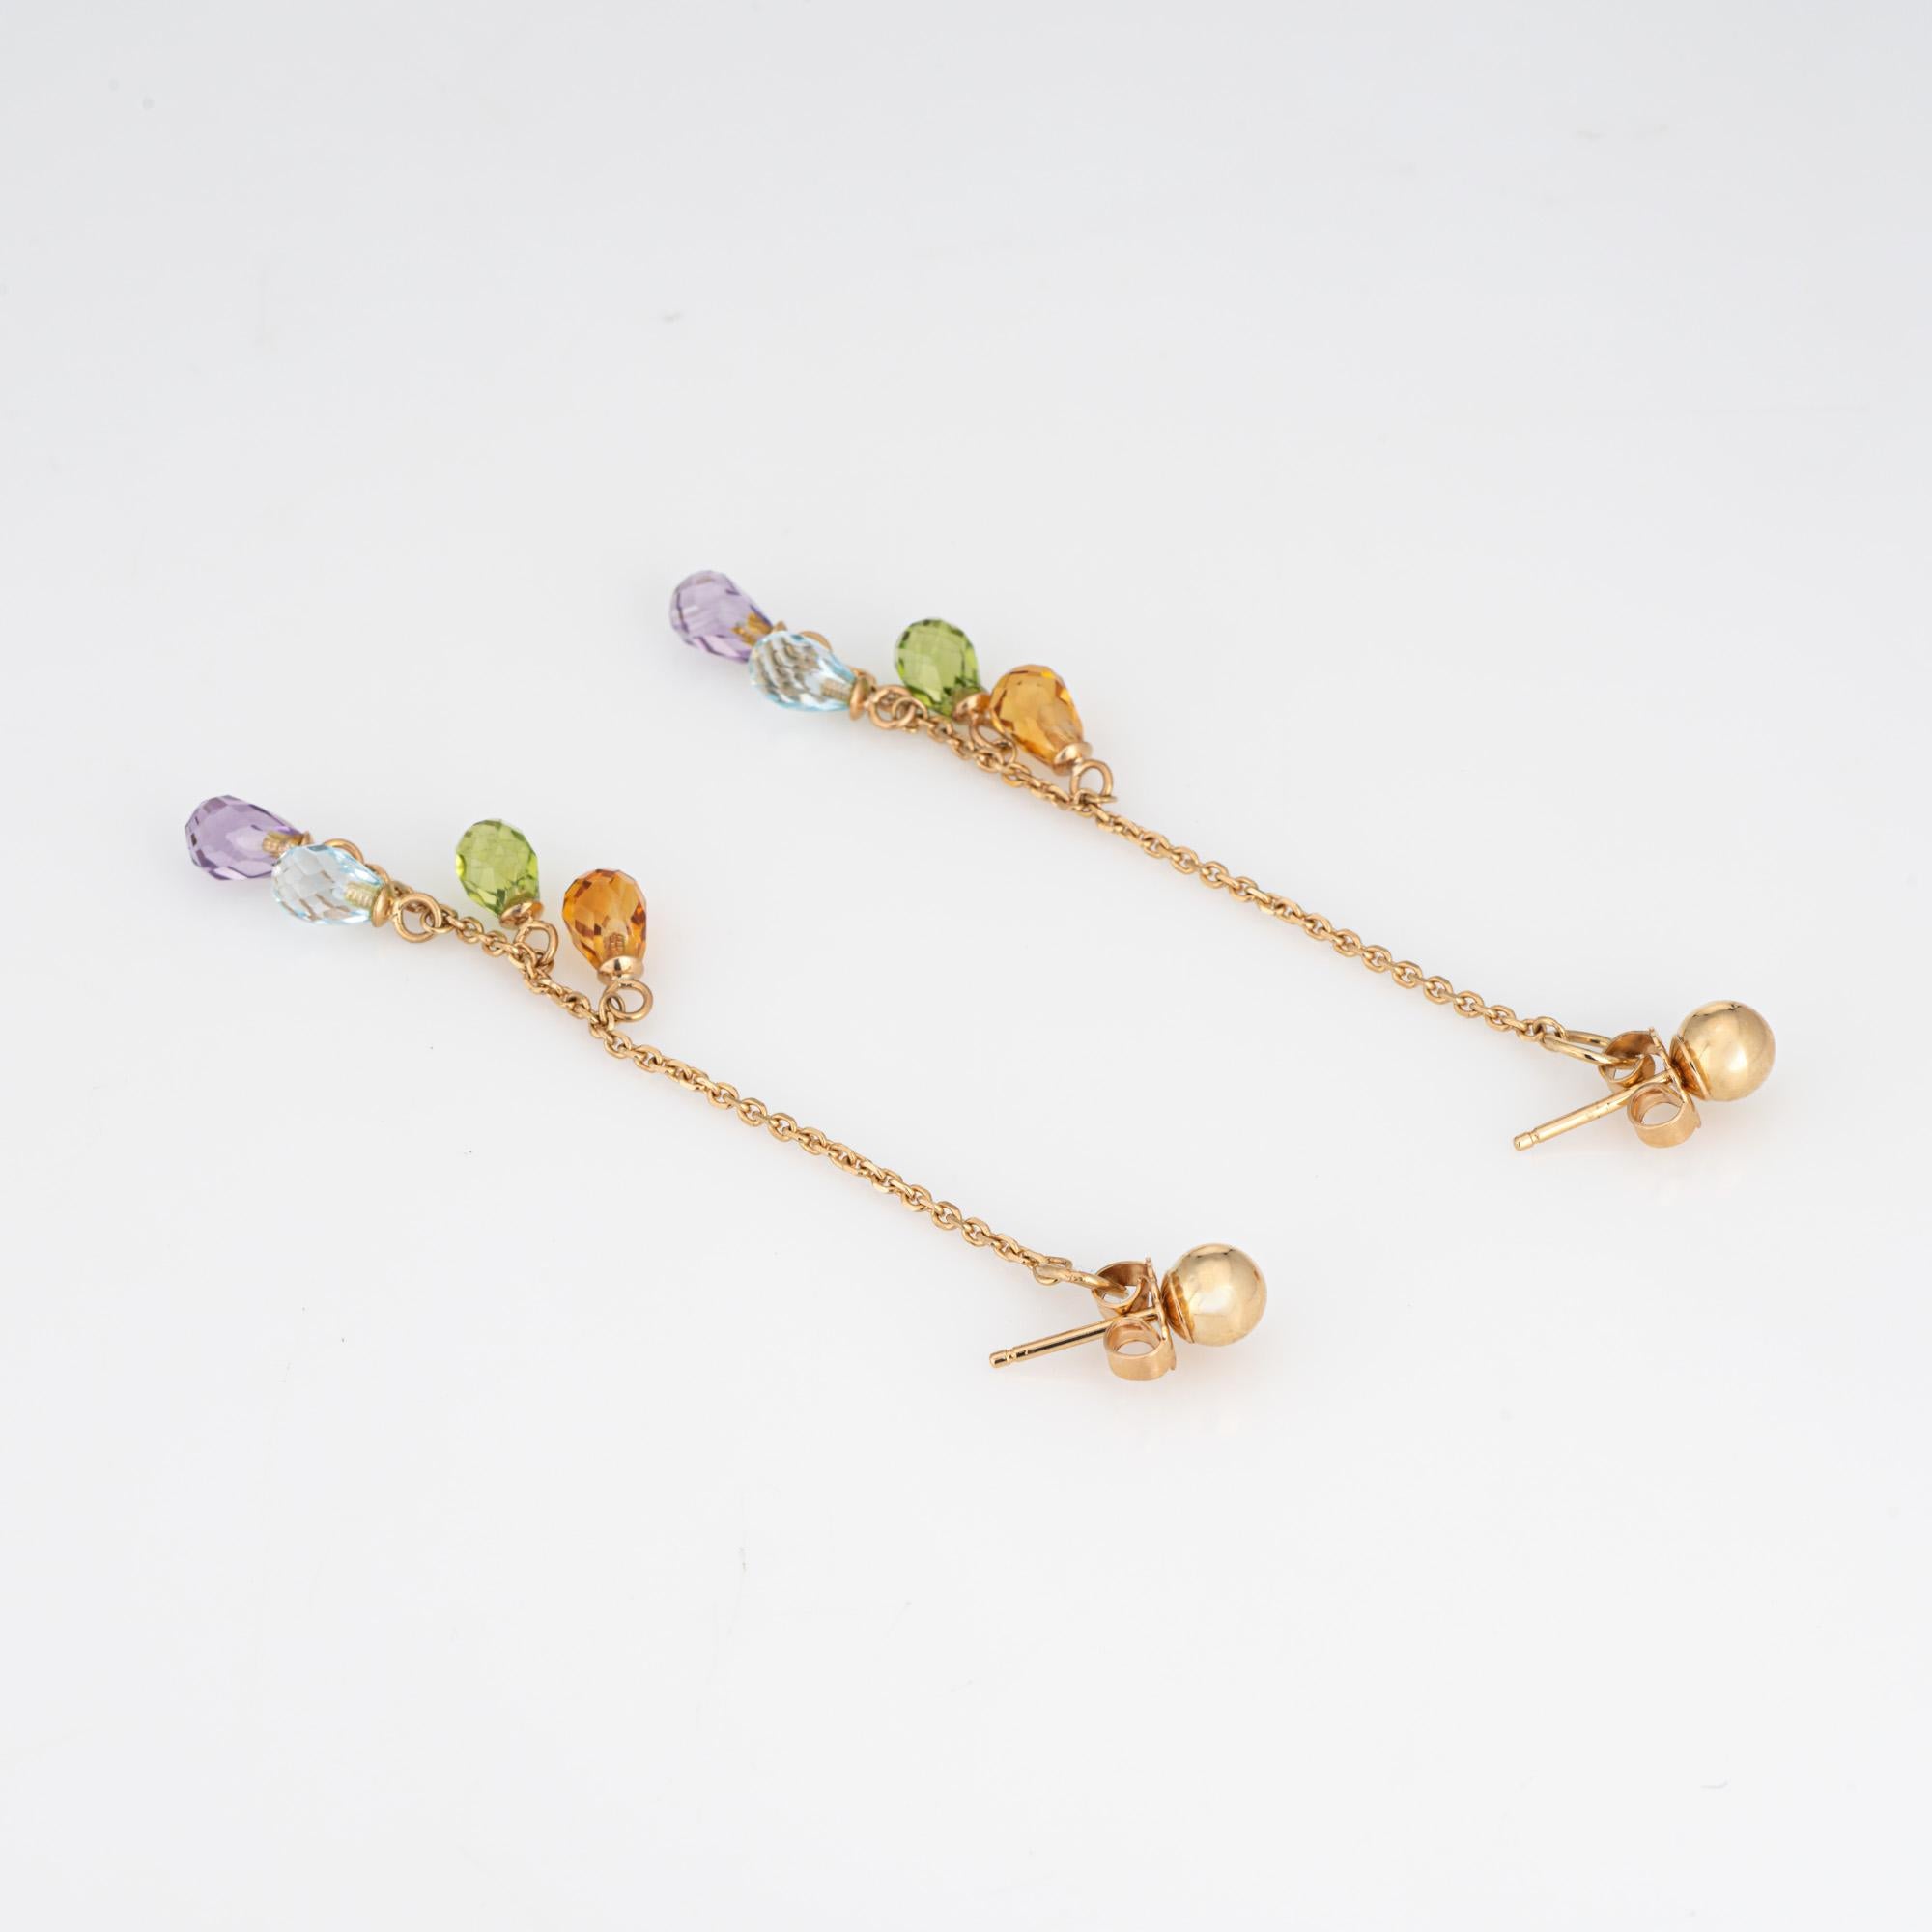 Fine detailed pair of semi precious rainbow gemstone drops crafted in 14k yellow gold. 

Briolette faceted blue topaz, citrine, amethyst and peridot measure 4mm each.
The stylish earrings feature briolette faceted stones that shimmer with every